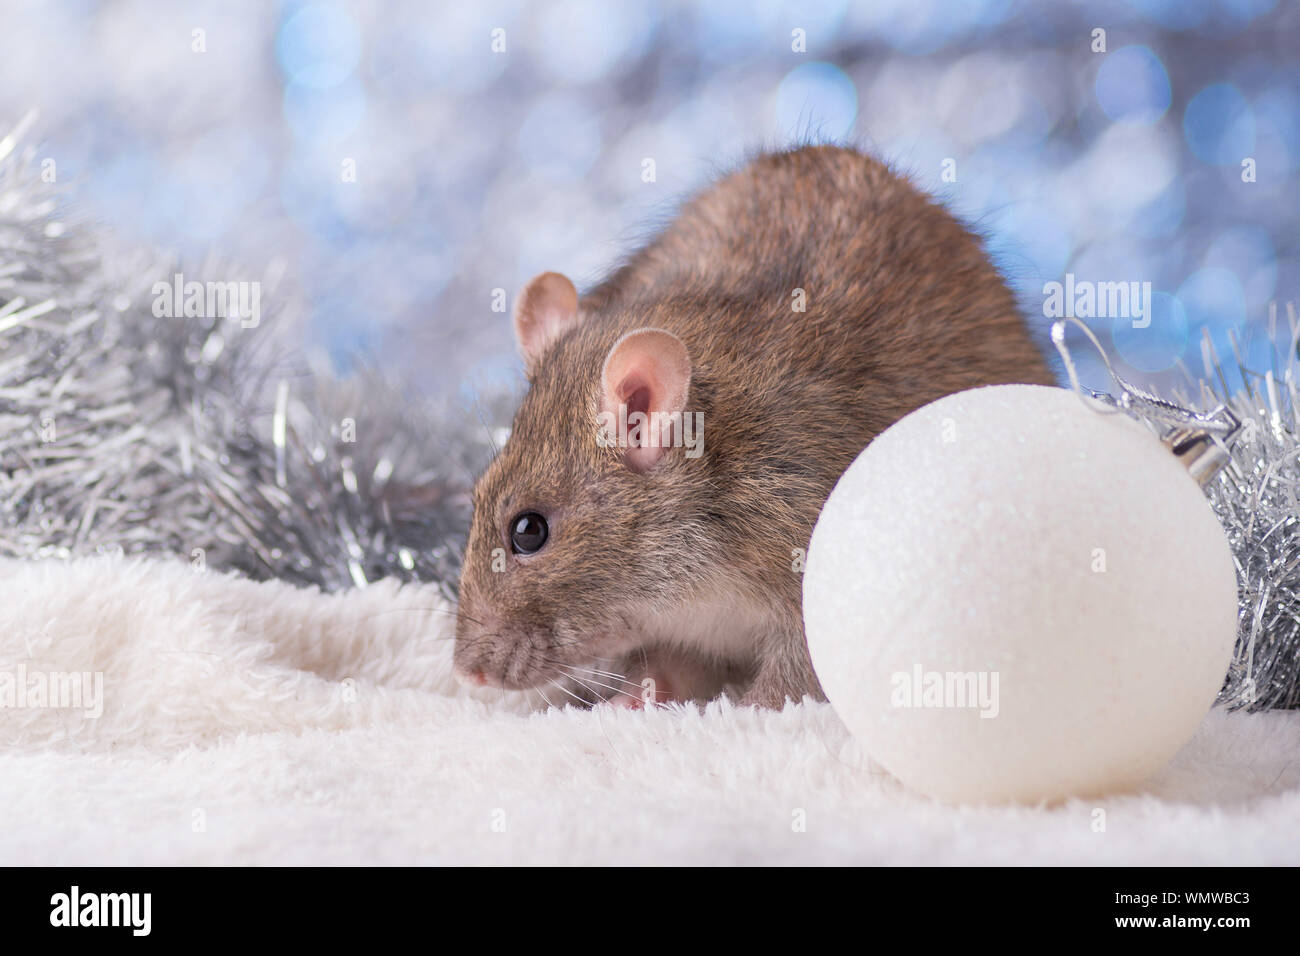 New Year concept. Cute white domestic rat in a New Year's decor. Symbol of the year 2020 is a rat. Gifts, toys, garlands, Christmas tree branches Stock Photo